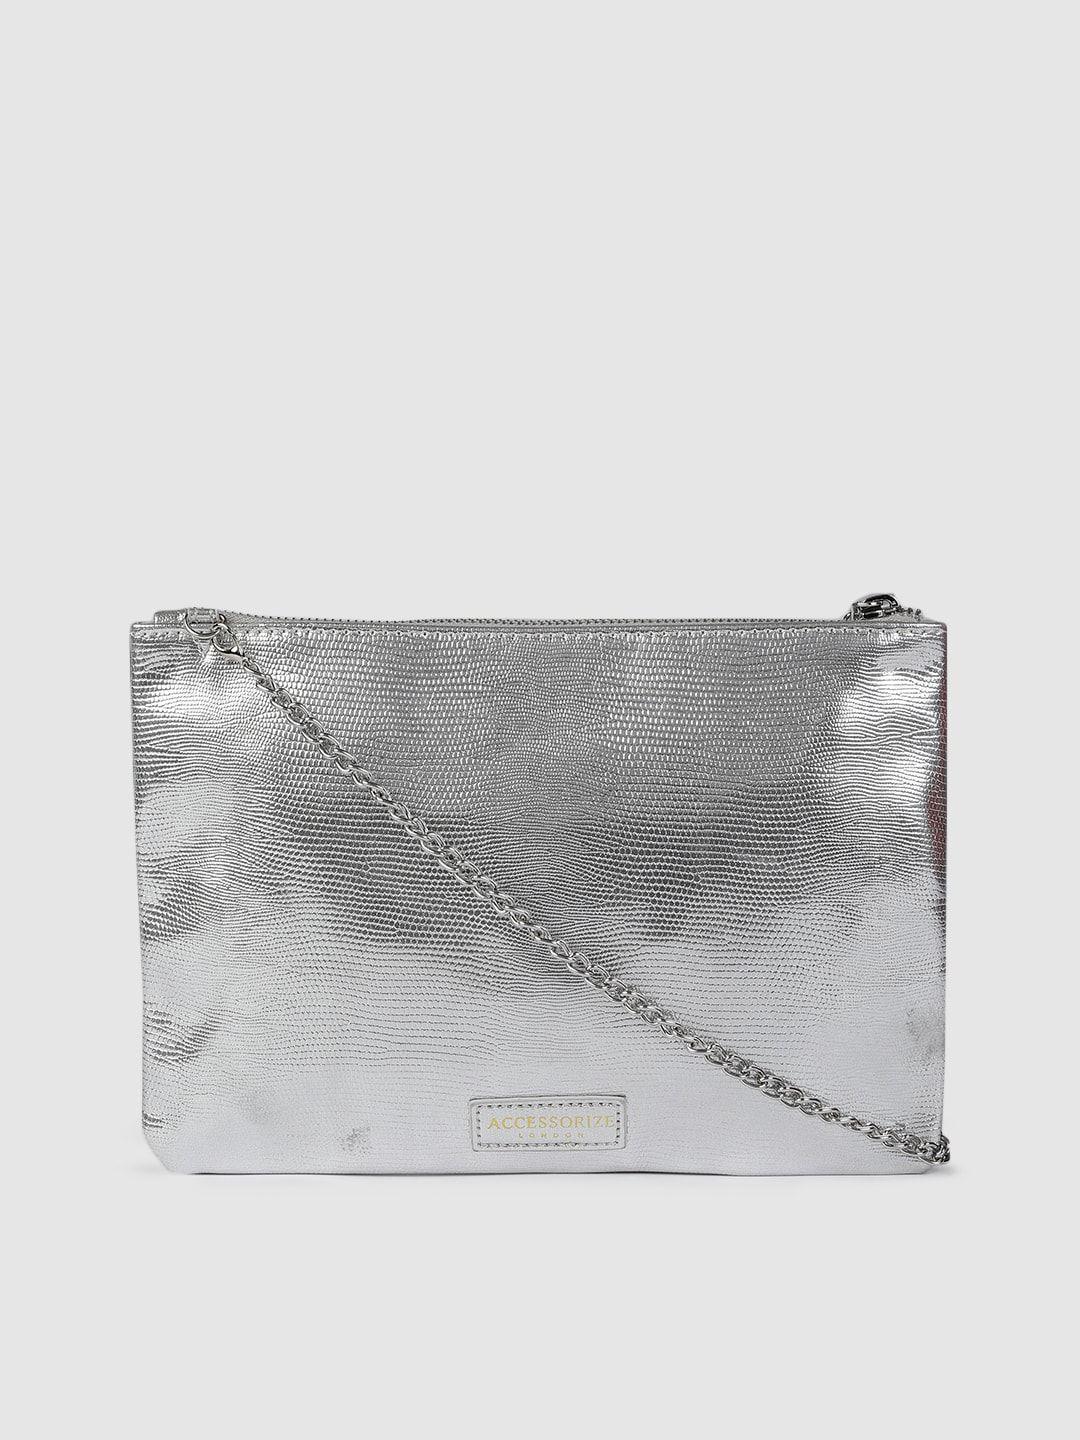 accessorize silver-toned textured clutch